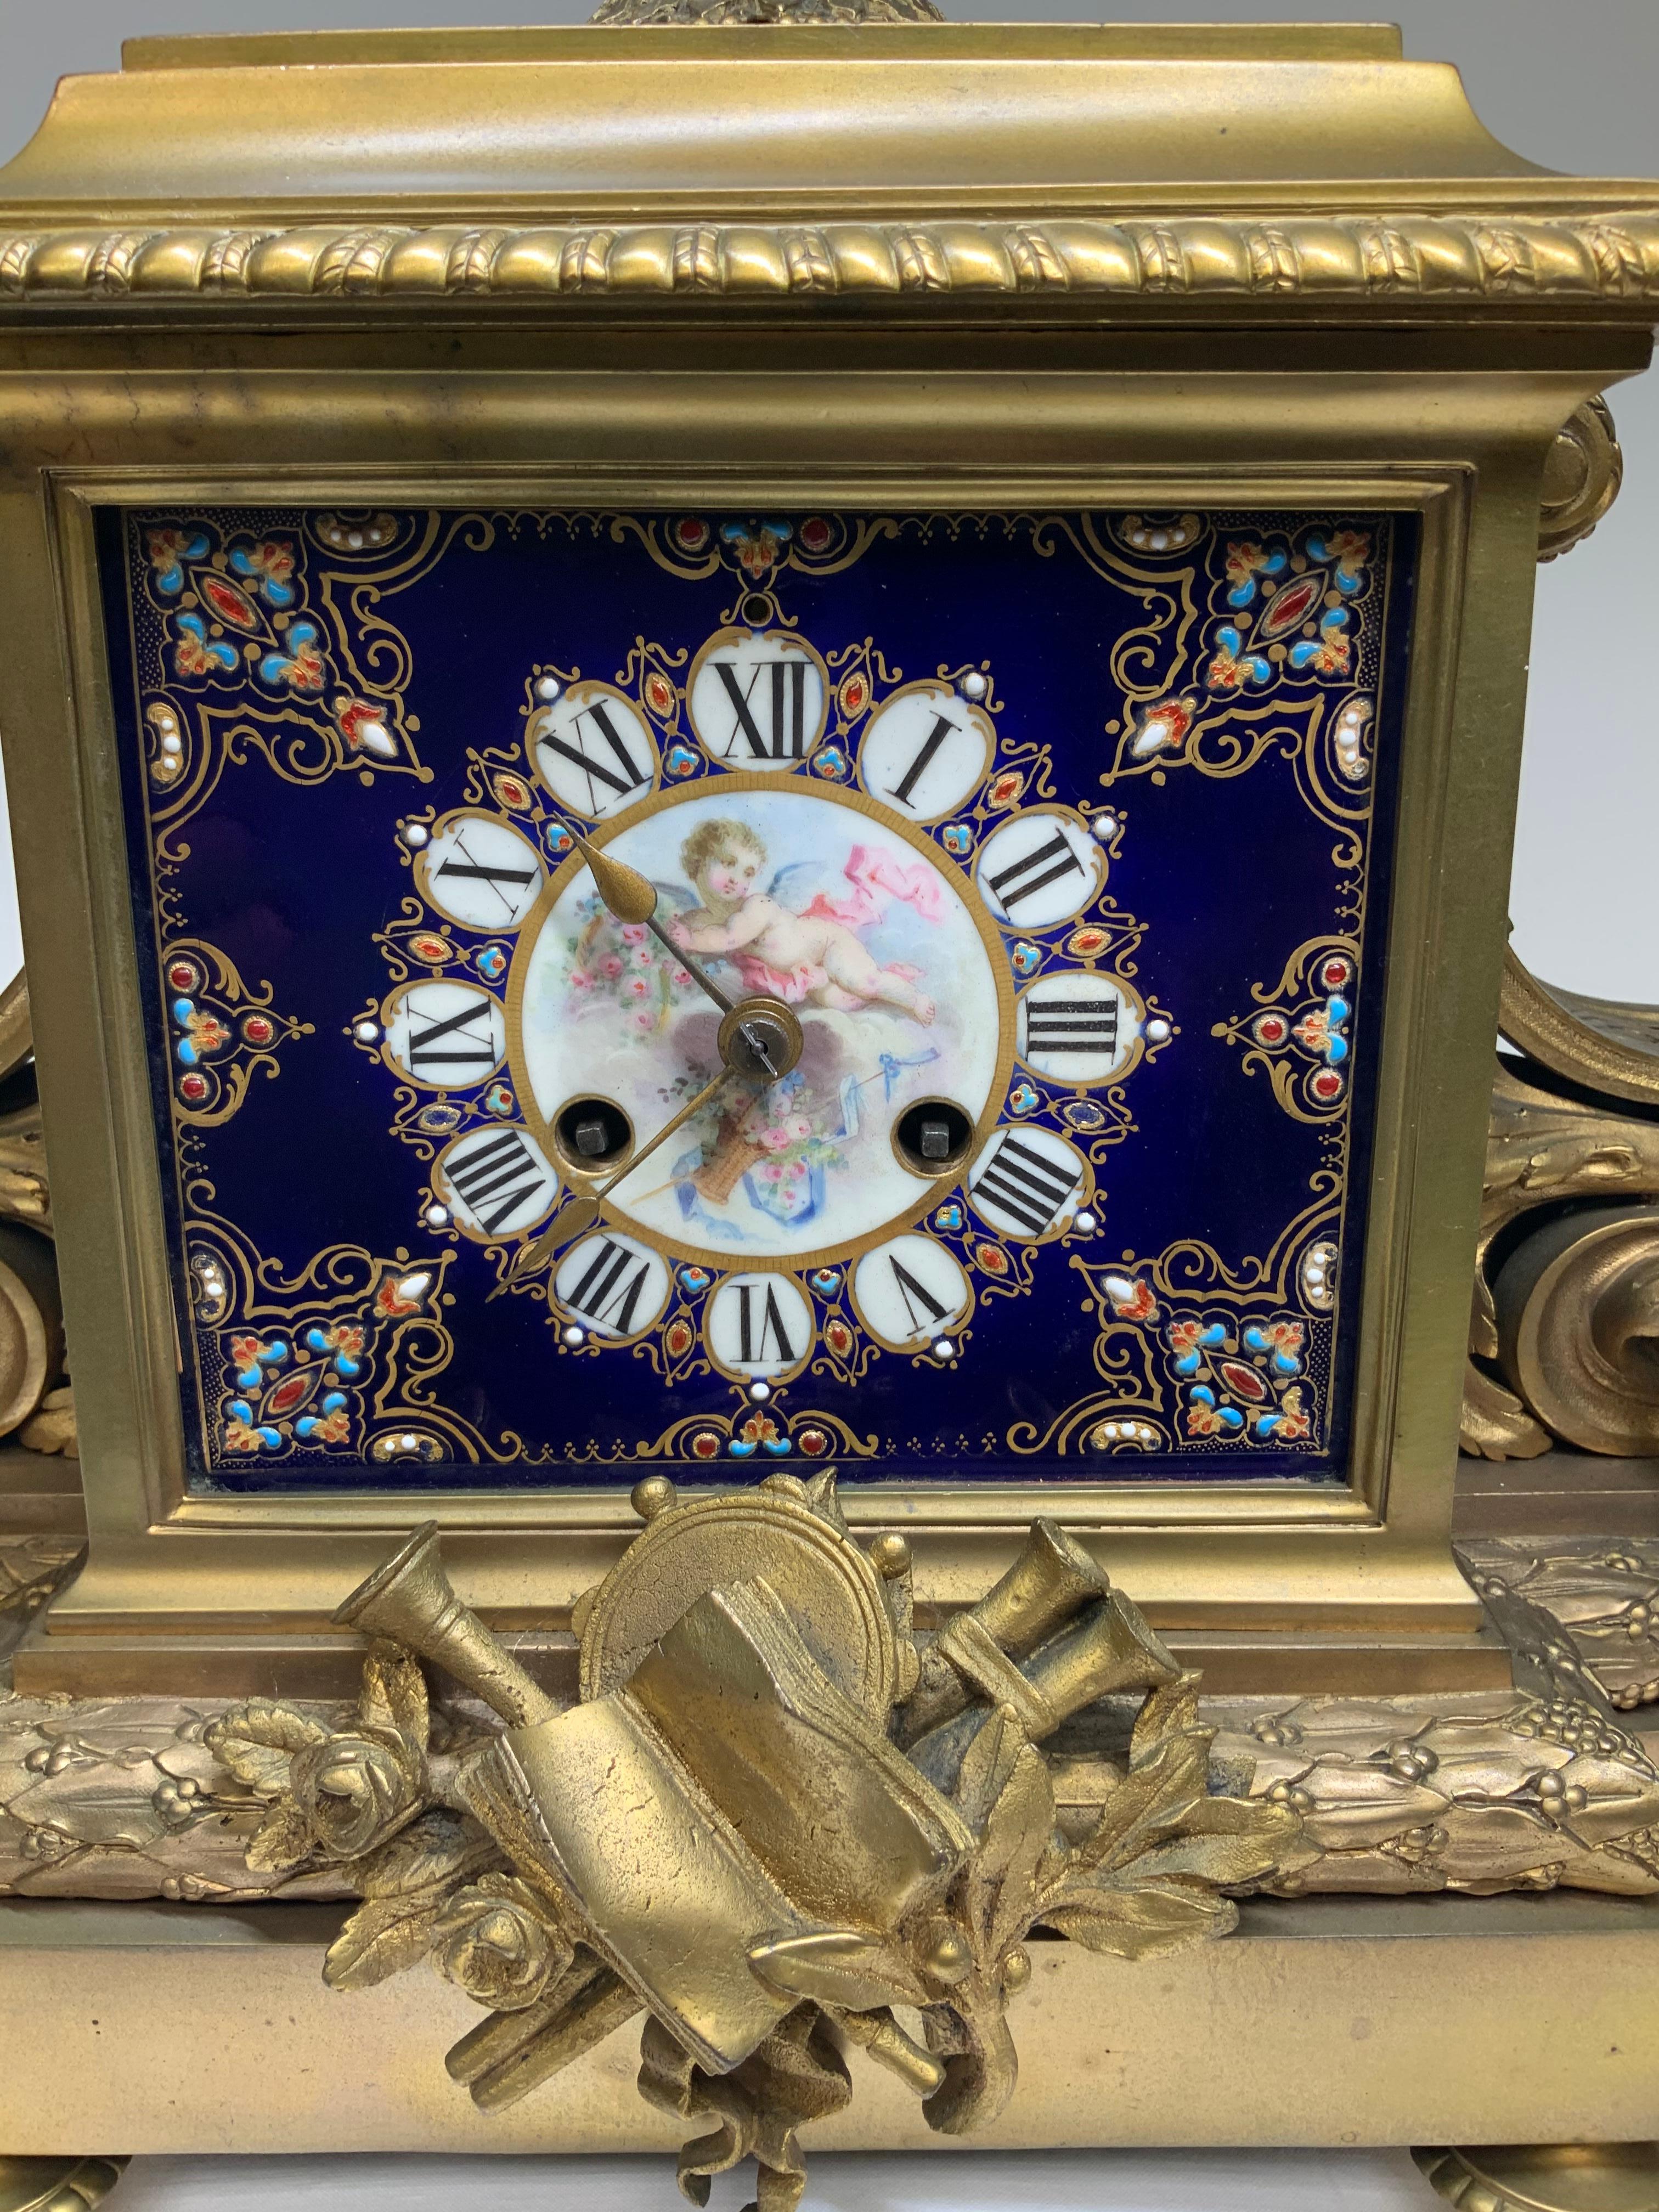 This a Sevres style porcelain ormolu bronze mounted mantel clock. The frontal cobalt blue porcelain panel is hand painted with a winged cherub holding a basket of flowers. Below him, there is another basket of flowers with ribbons. The dial is in